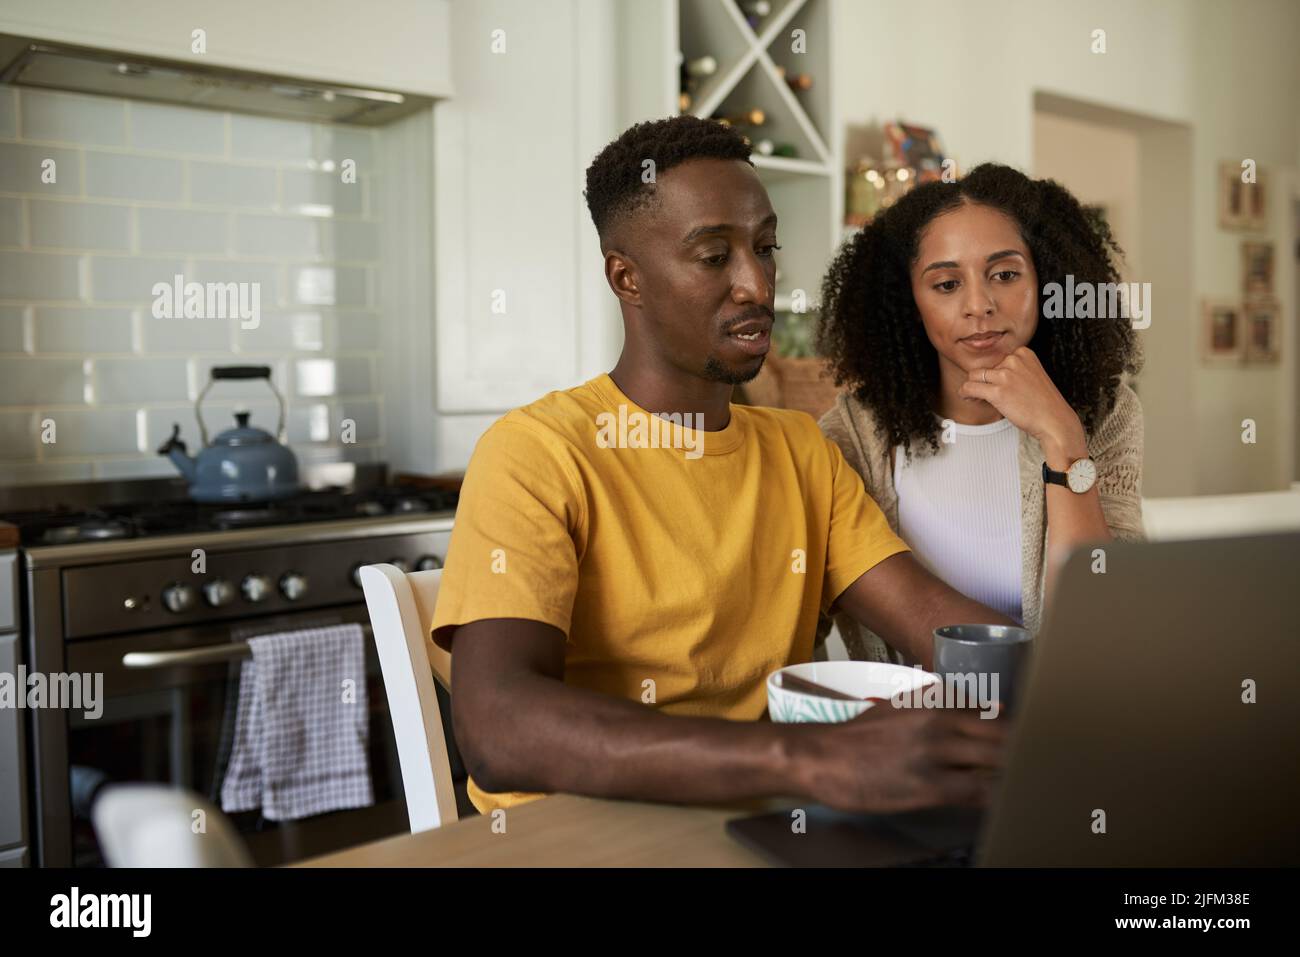 Young multiethnic couple using a laptop during breakfast at a kitchen table Stock Photo